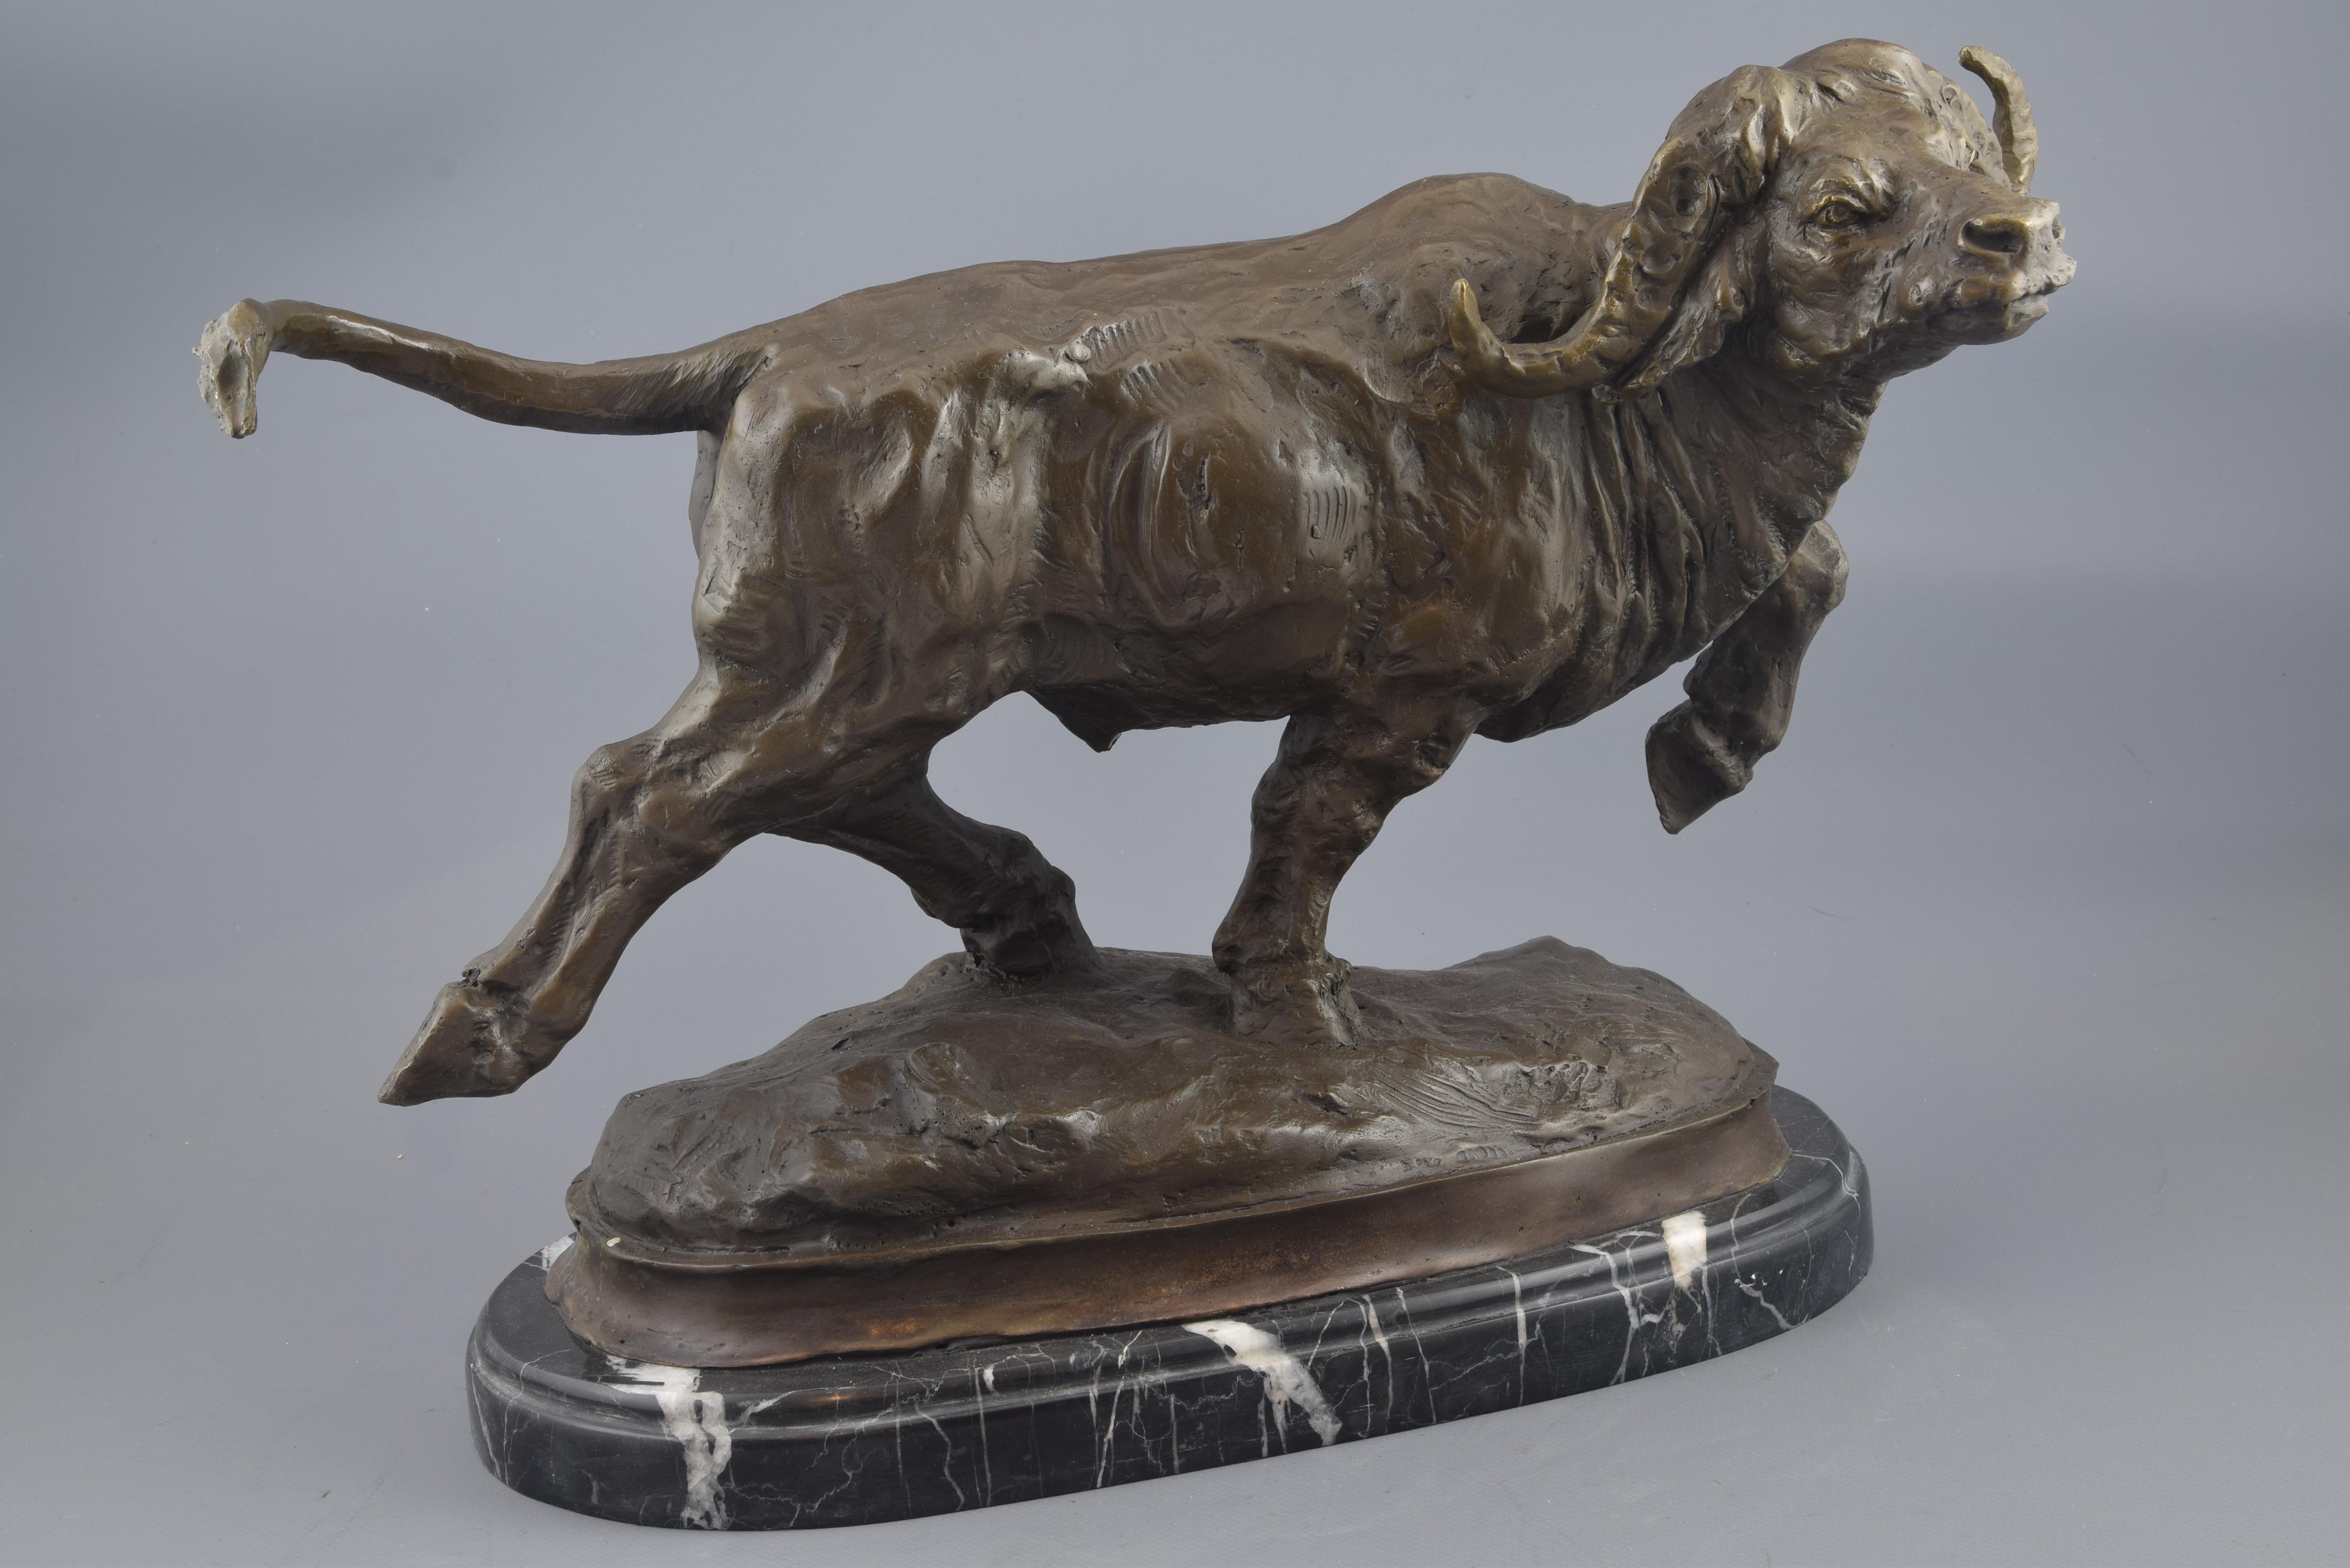 Bronze sculpture on a veined marble base showing an African buffalo, also called Cape buffalo or Kaffir, advancing rapidly. The movement, in addition to thanks to the animal's posture with its legs in the air and turning its head to one side, is